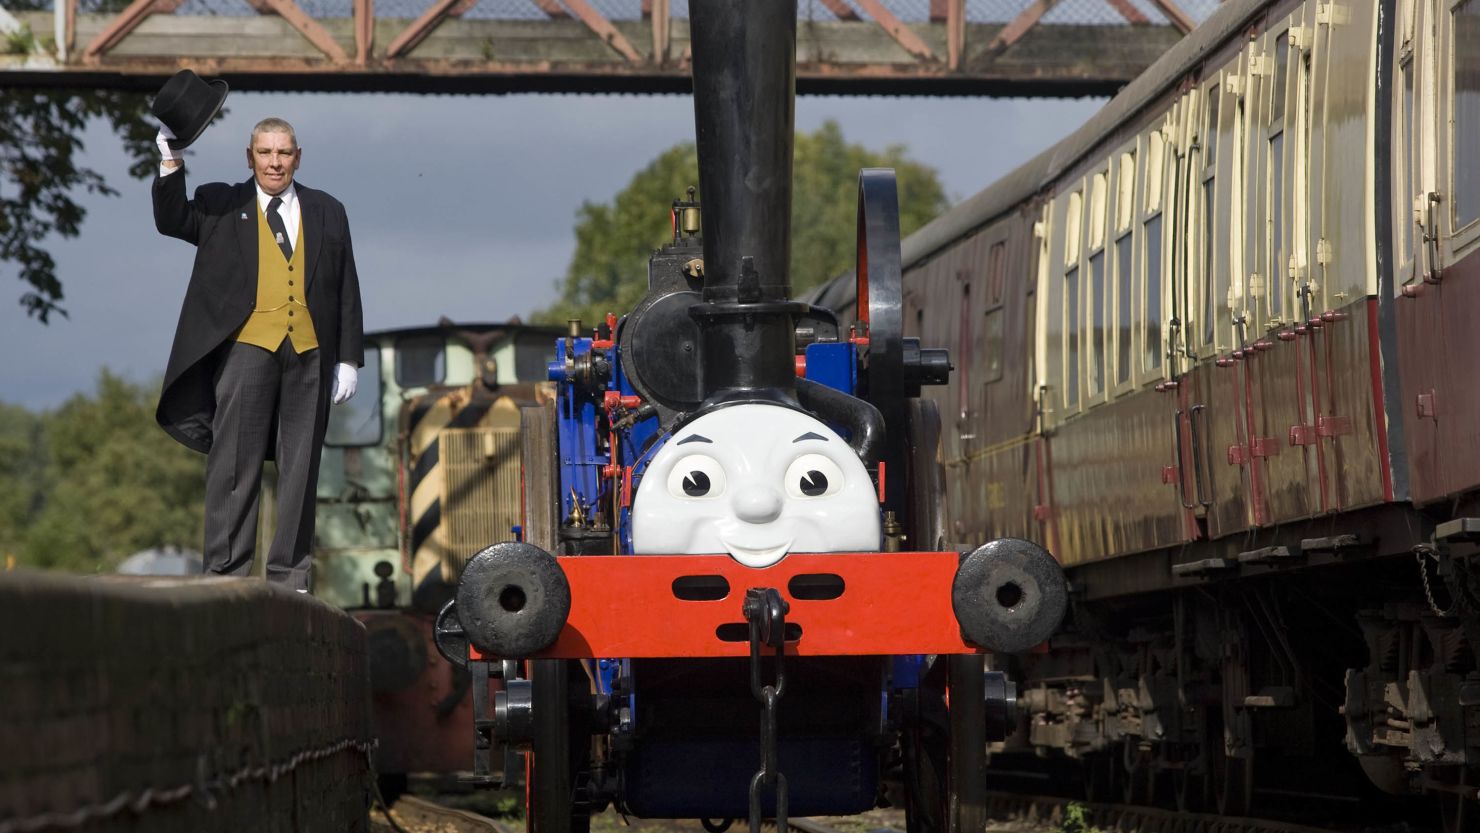 Could a "Fat Controller" figure, famous from children's series Thomas the Tank Engine, help revive the UK's railways?